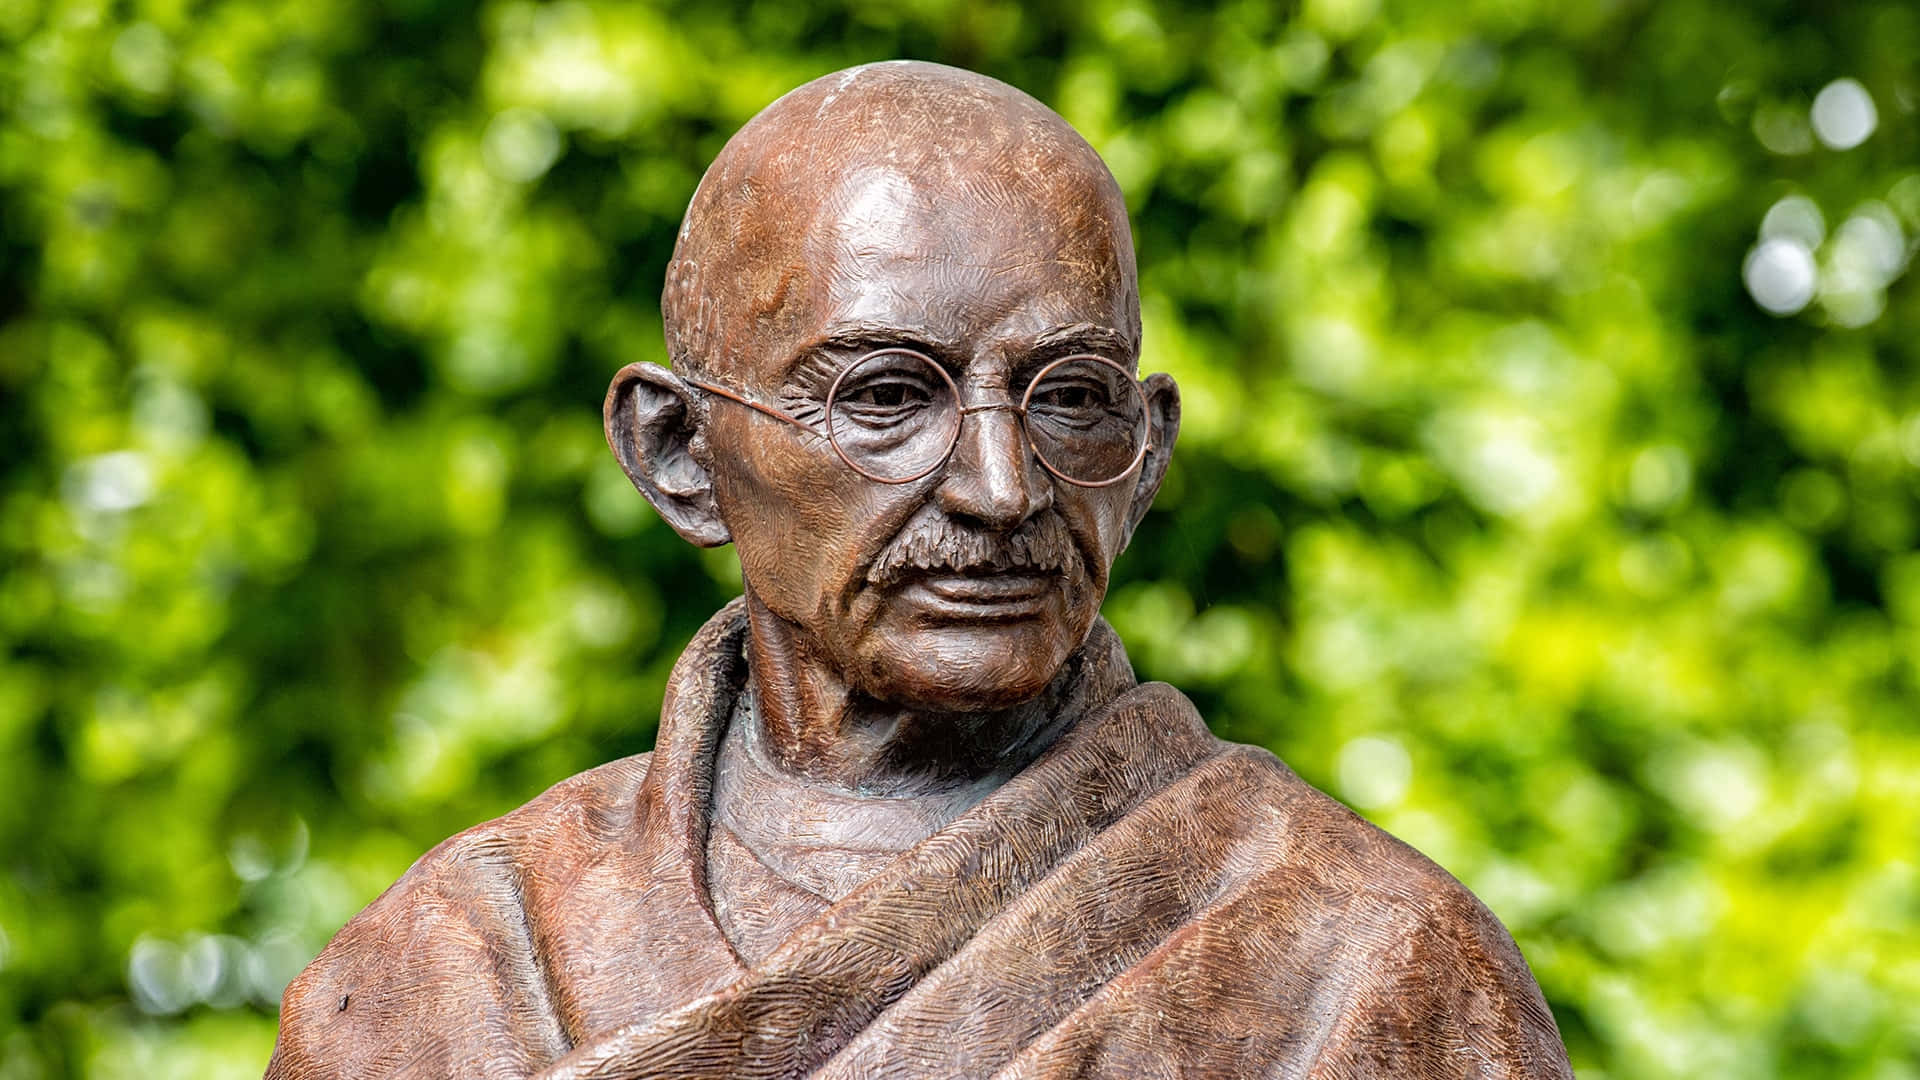 Mahatma Gandhi, leader of the Indian independence movement